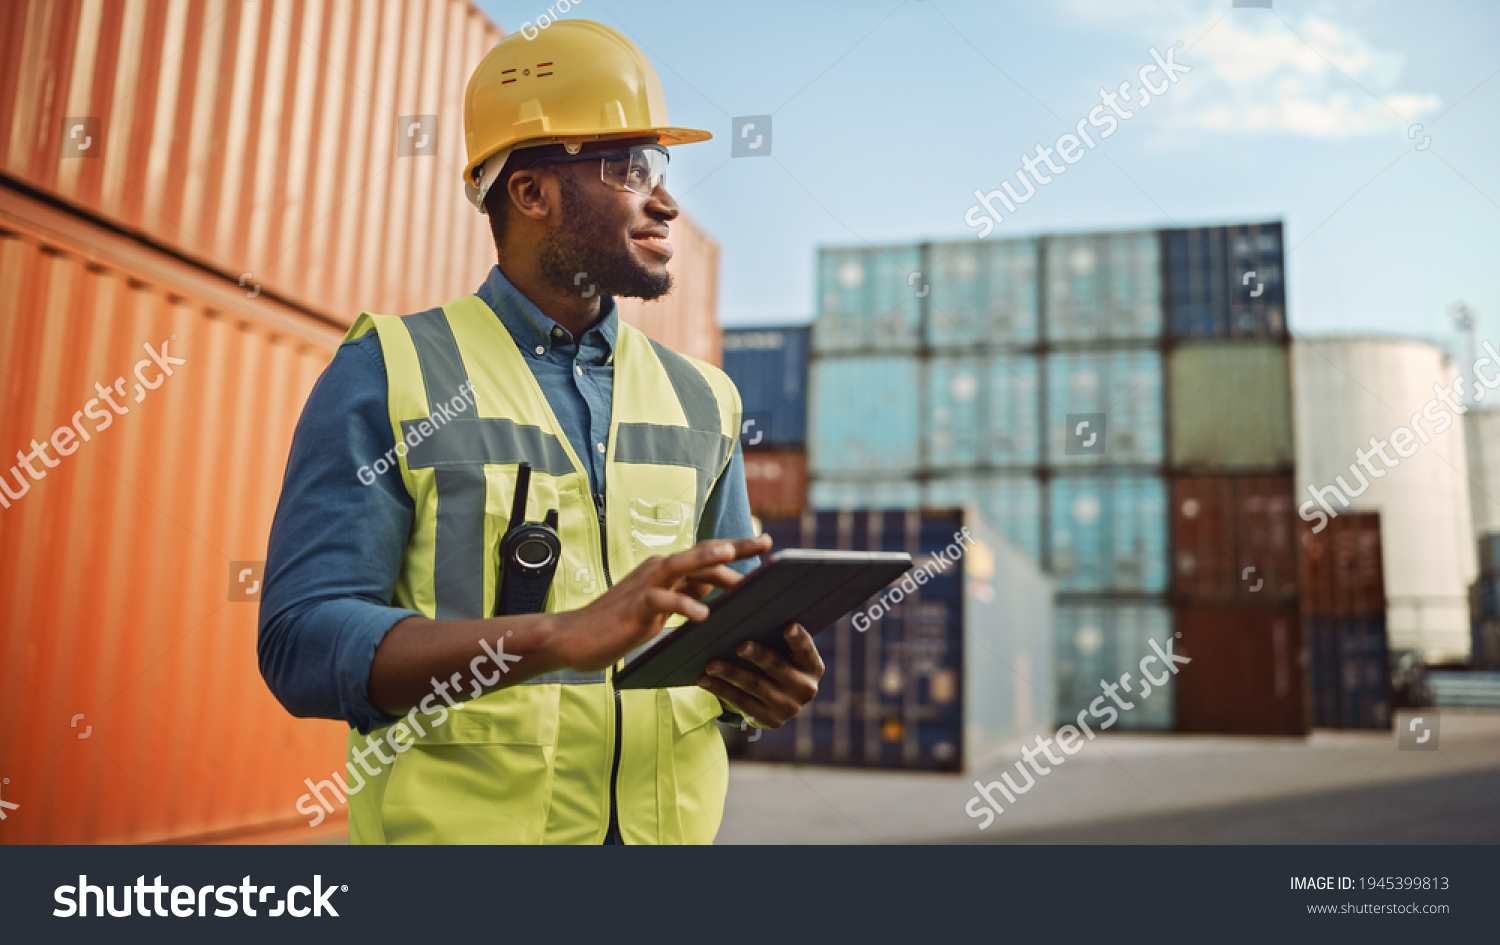 Smiling Portrait of a Handsome African American Black Industrial Engineer in Yellow Hard Hat and Safety Vest Working on Tablet Computer. Foreman or Supervisor in Container Terminal. #1945399813